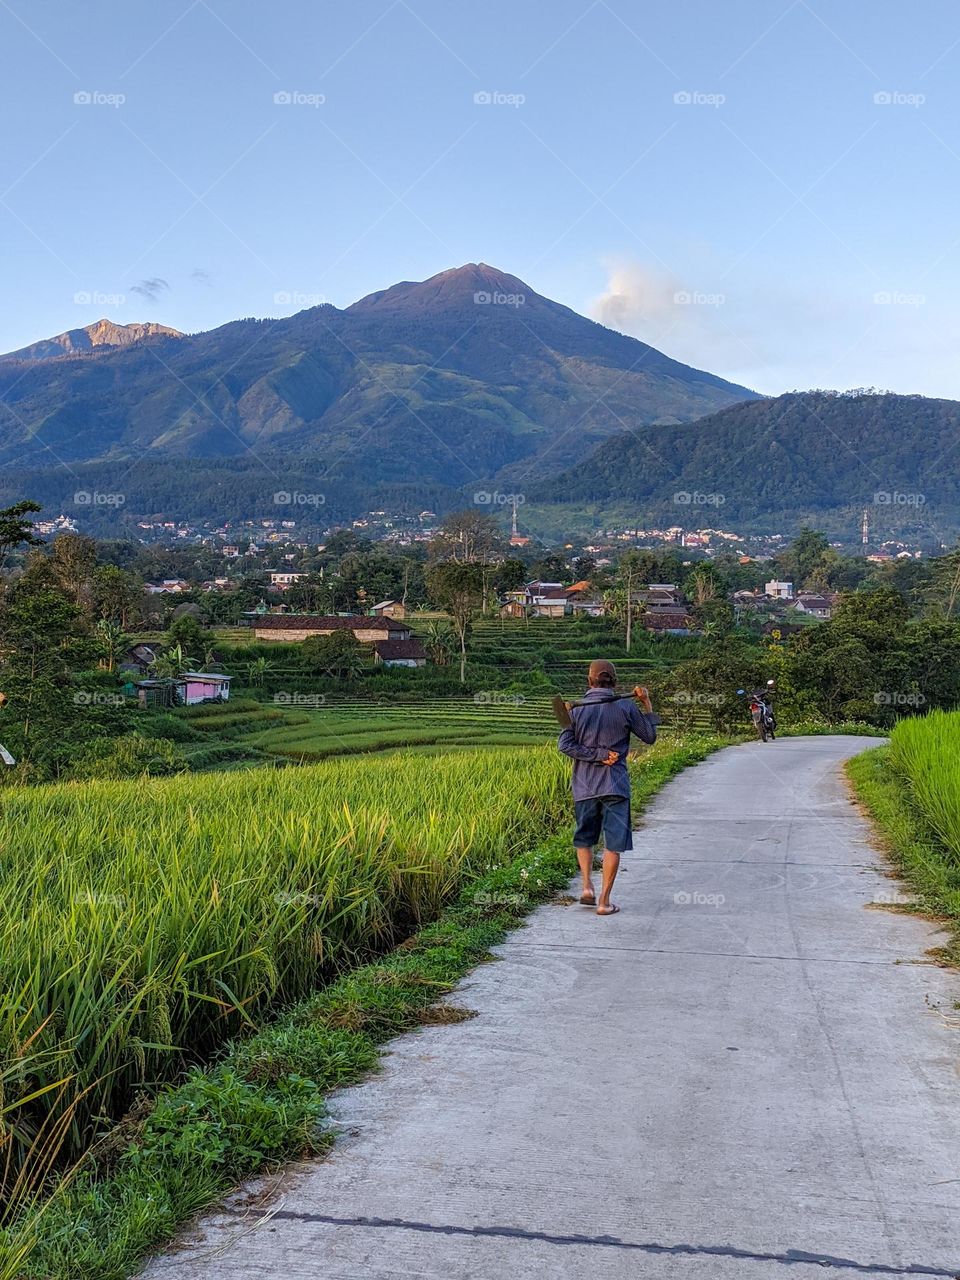 Enjoying the morning views of the countryside and rice fields which are so beautiful with a very dashing mountain background